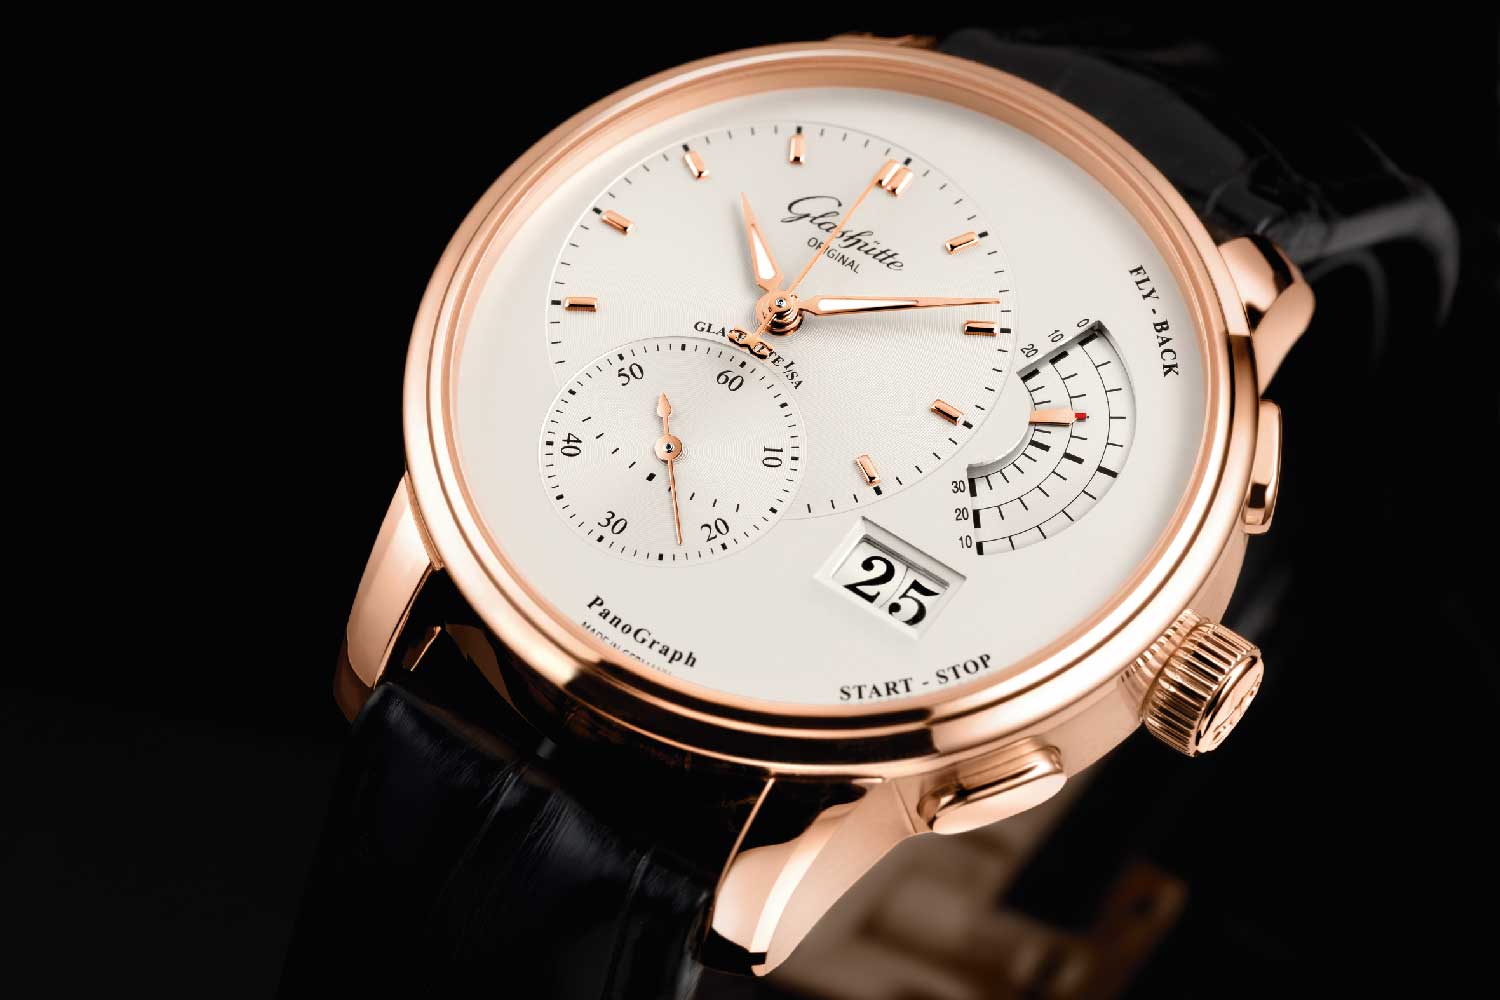 PanoGraph featuring 30-minute flyback chronograph counter